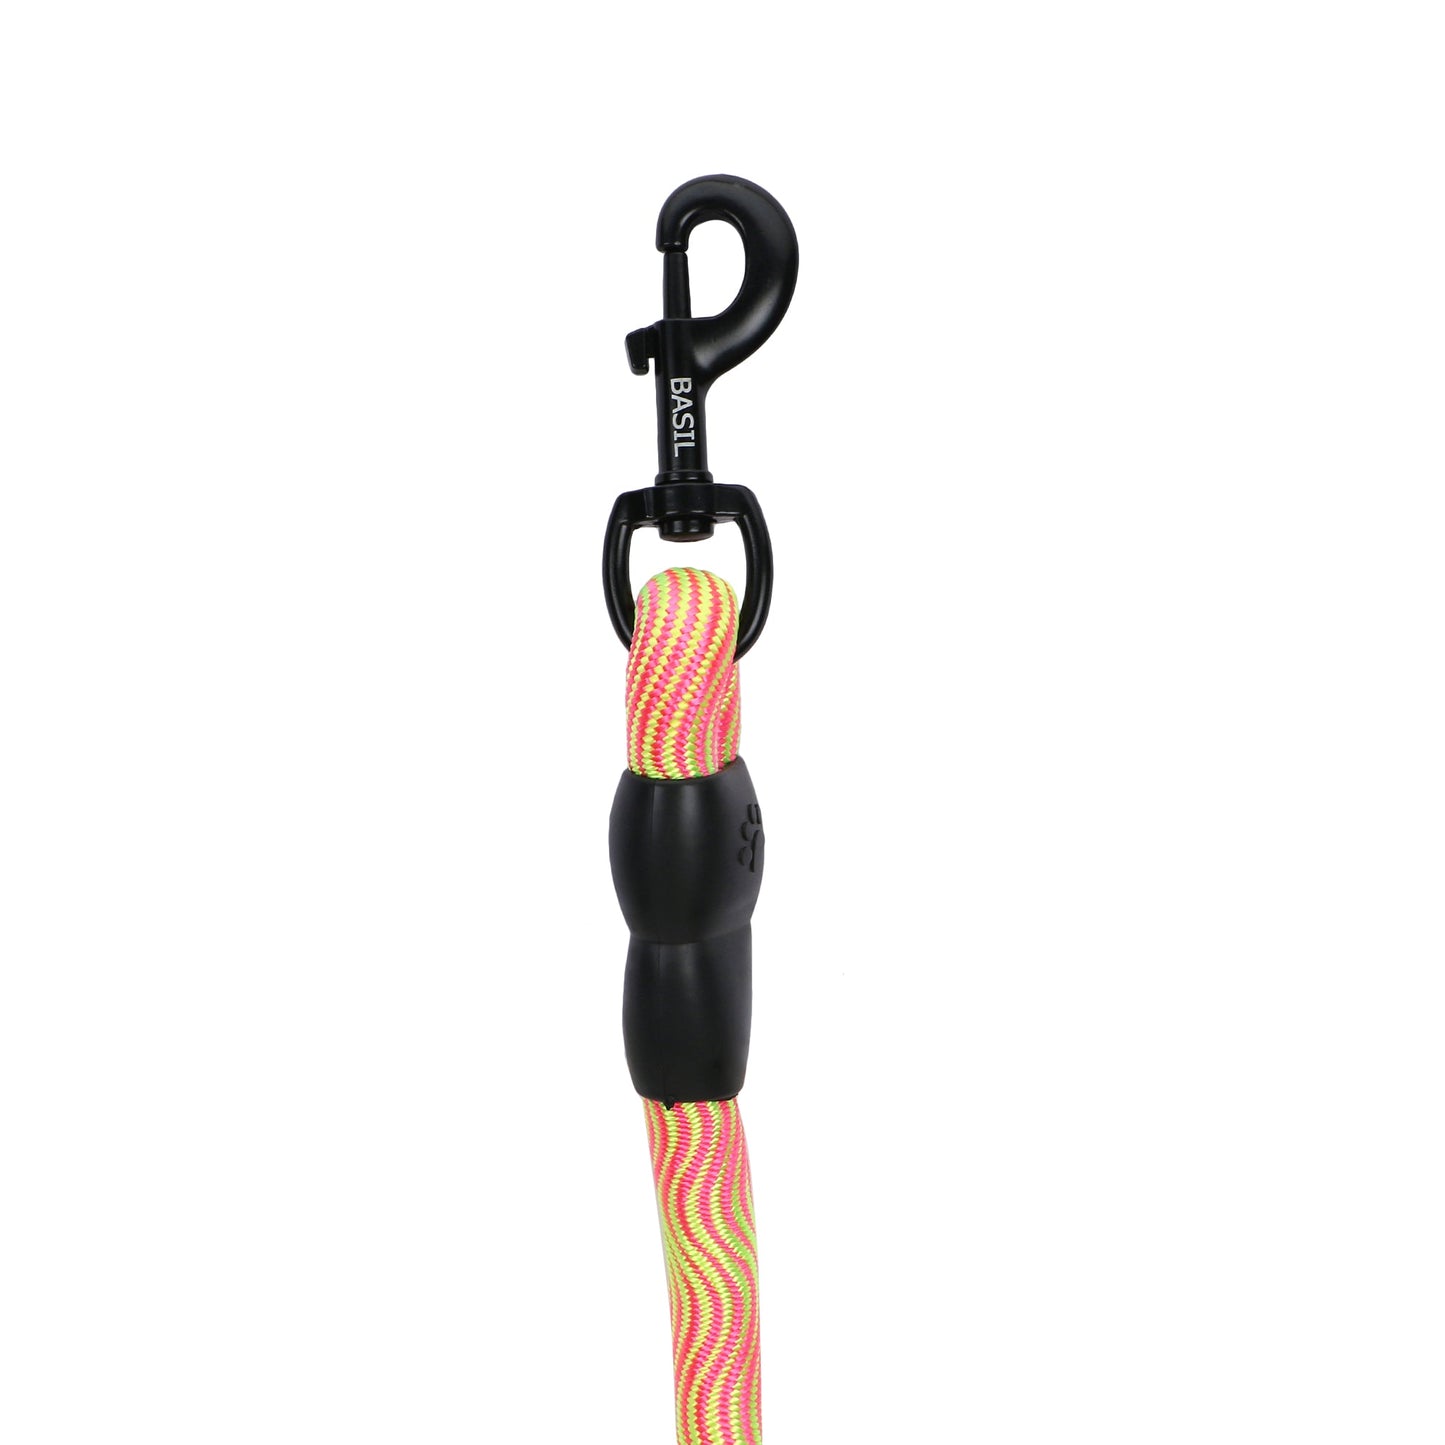 BASIL High Reflective Rope Leash for Dogs & Puppies, 4 Feet (Yellow & Pink)